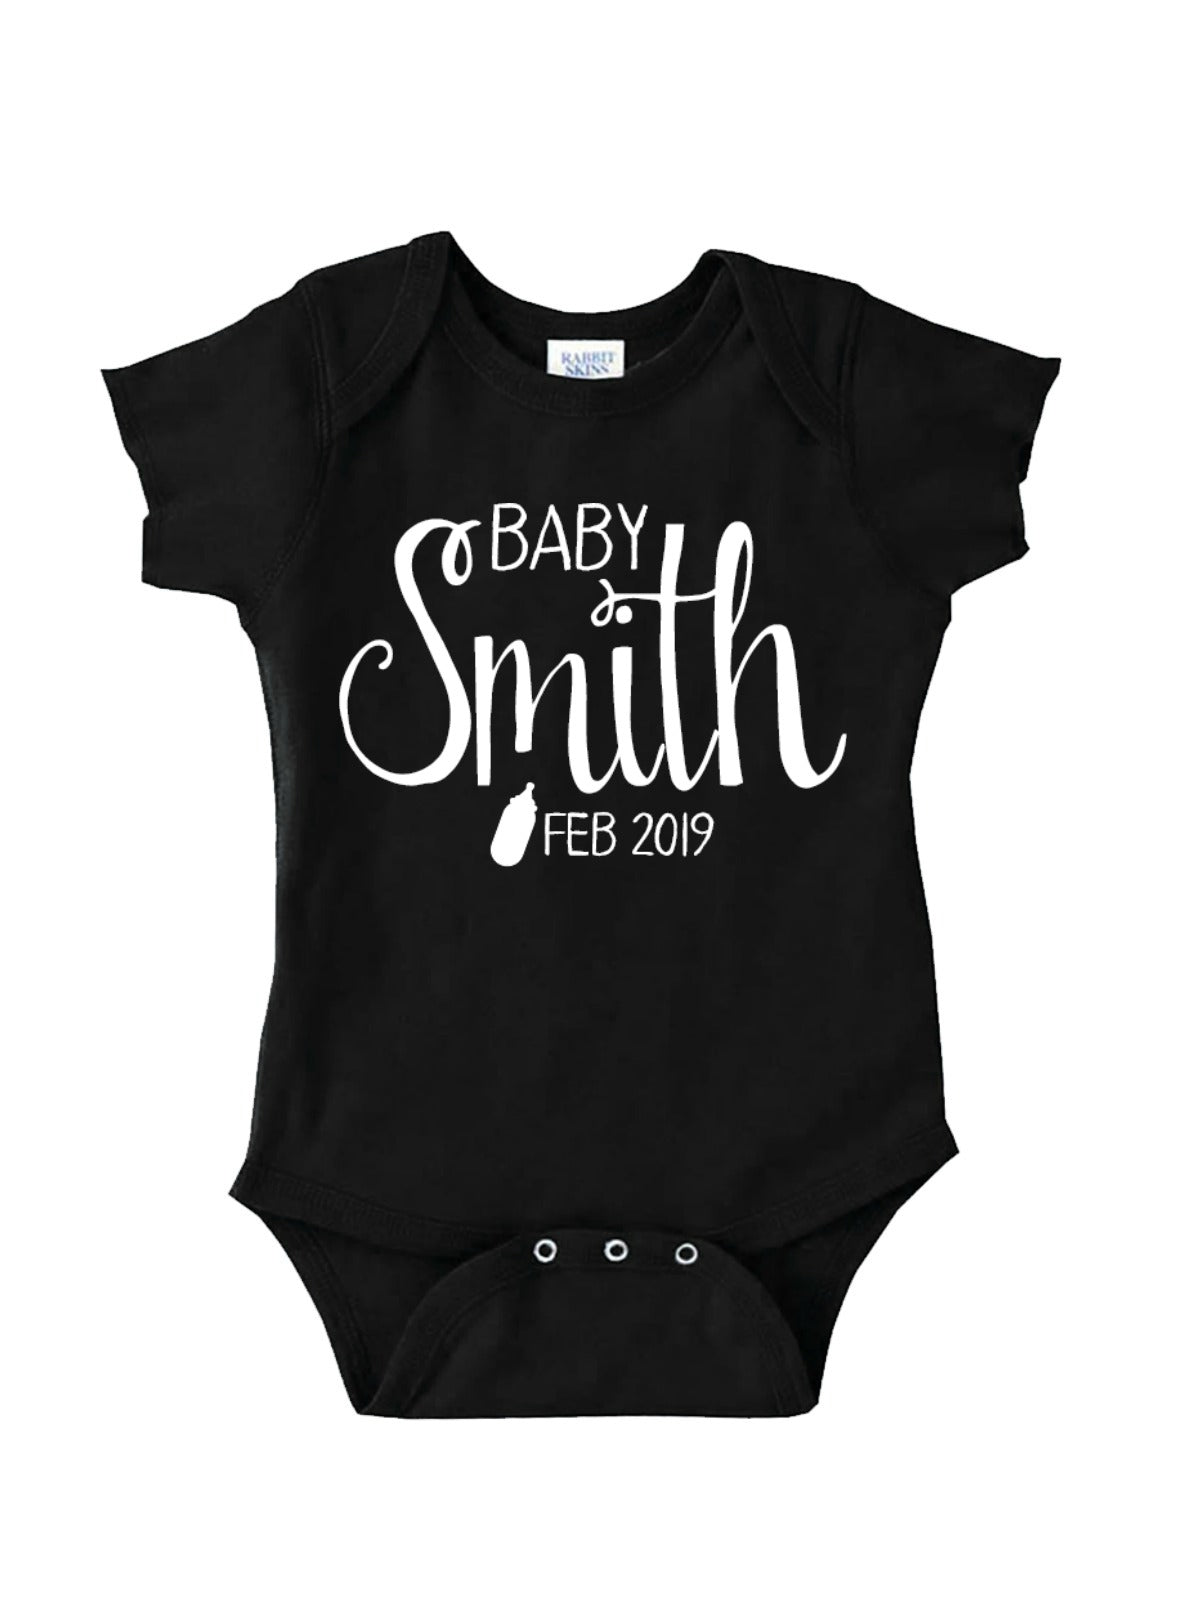 personalized pregnancy announcement baby bodysuit last name and due date